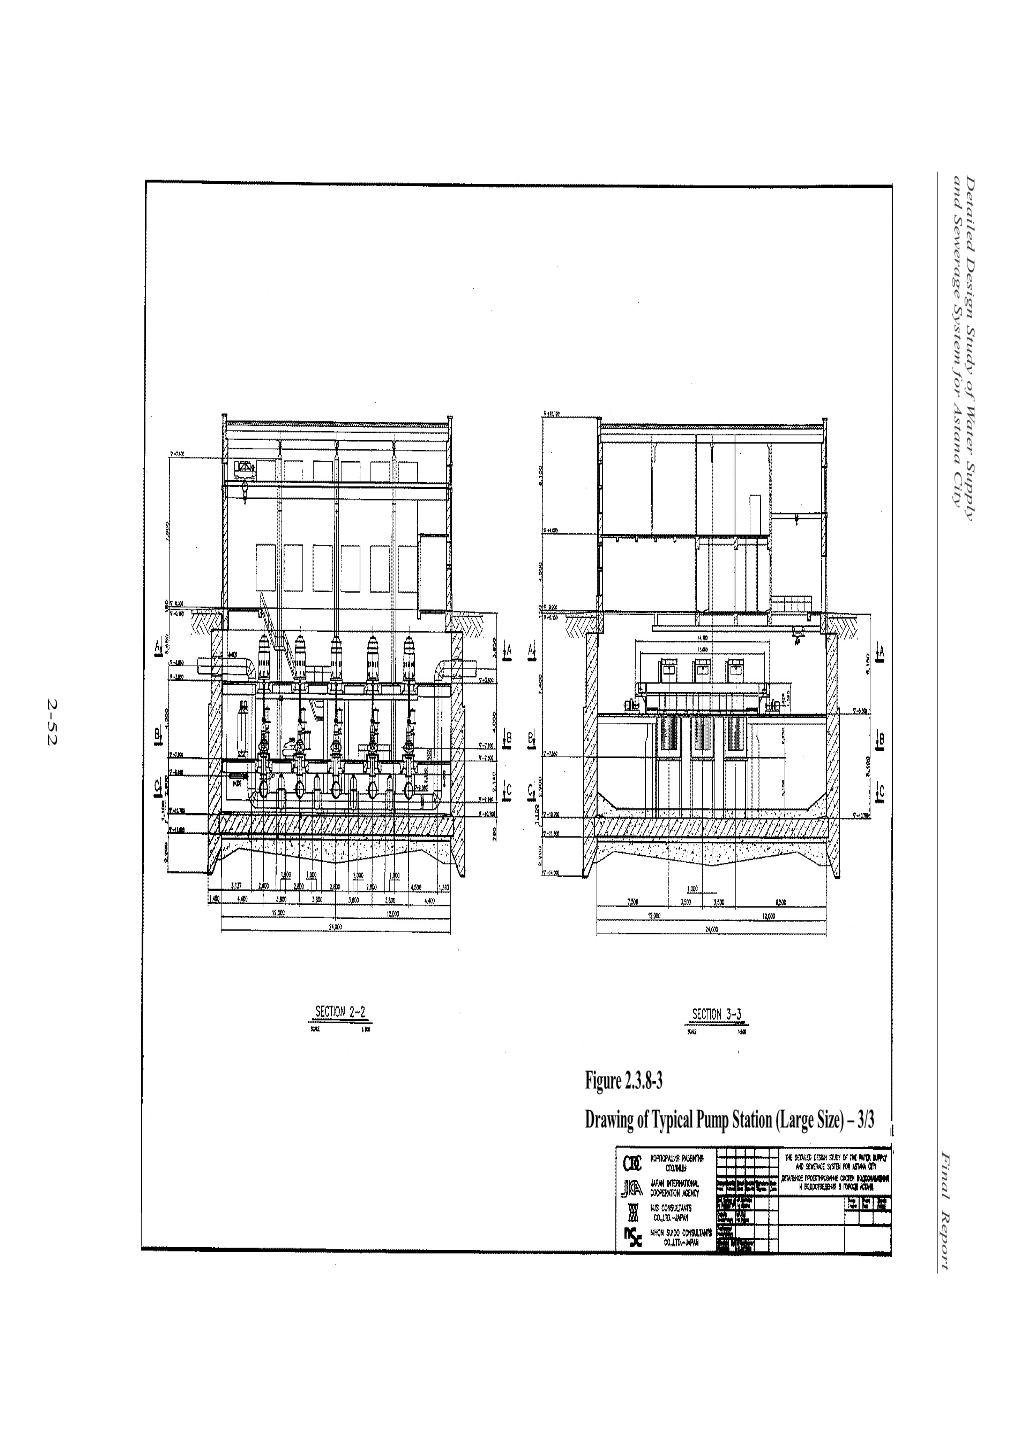 2-52 Figure 2.3.8-3 Drawing of Typical Pump Station (Large Size)